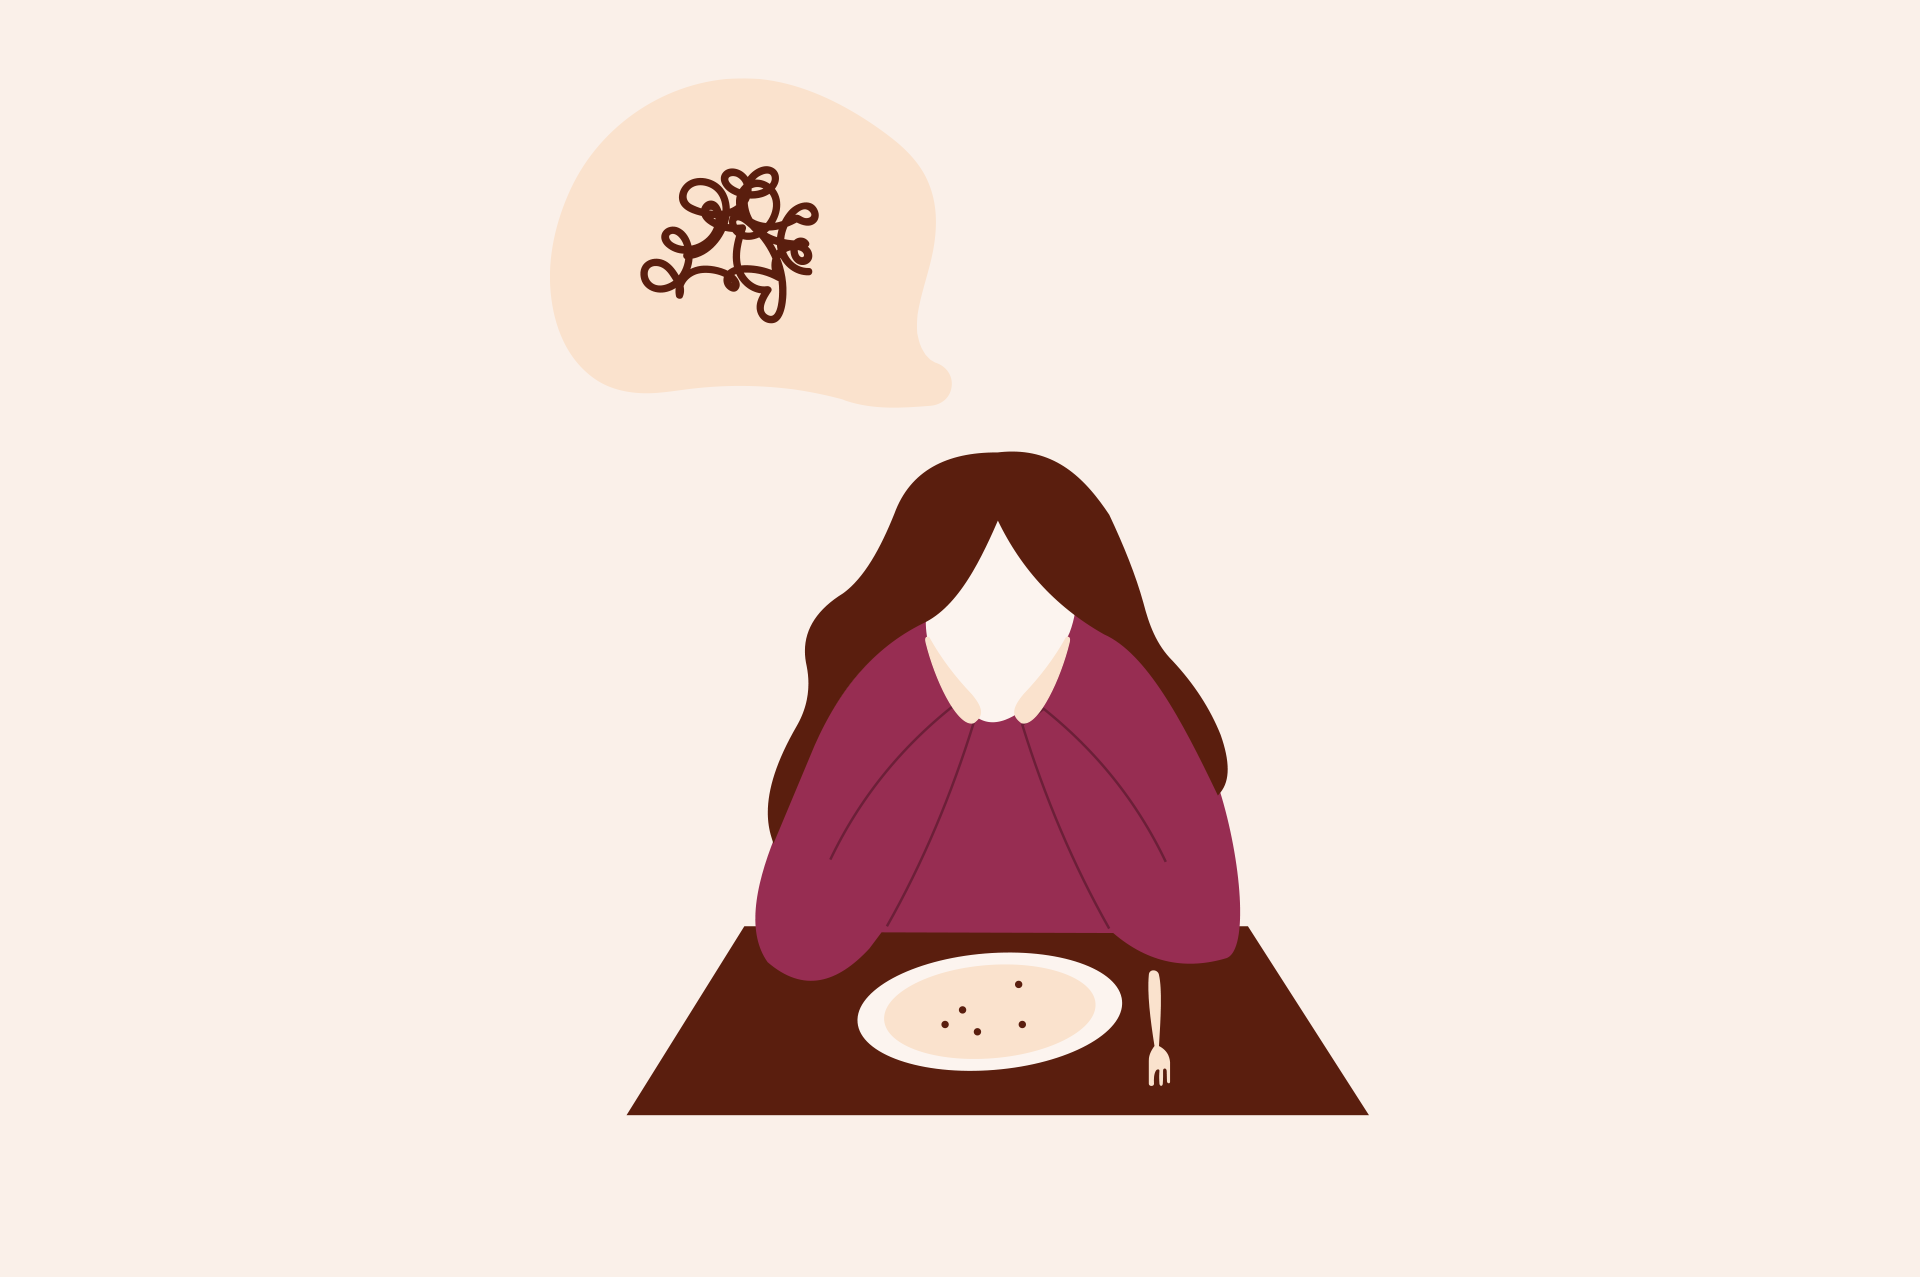 An illustration of a person sitting in front of an empty plate looking anxious